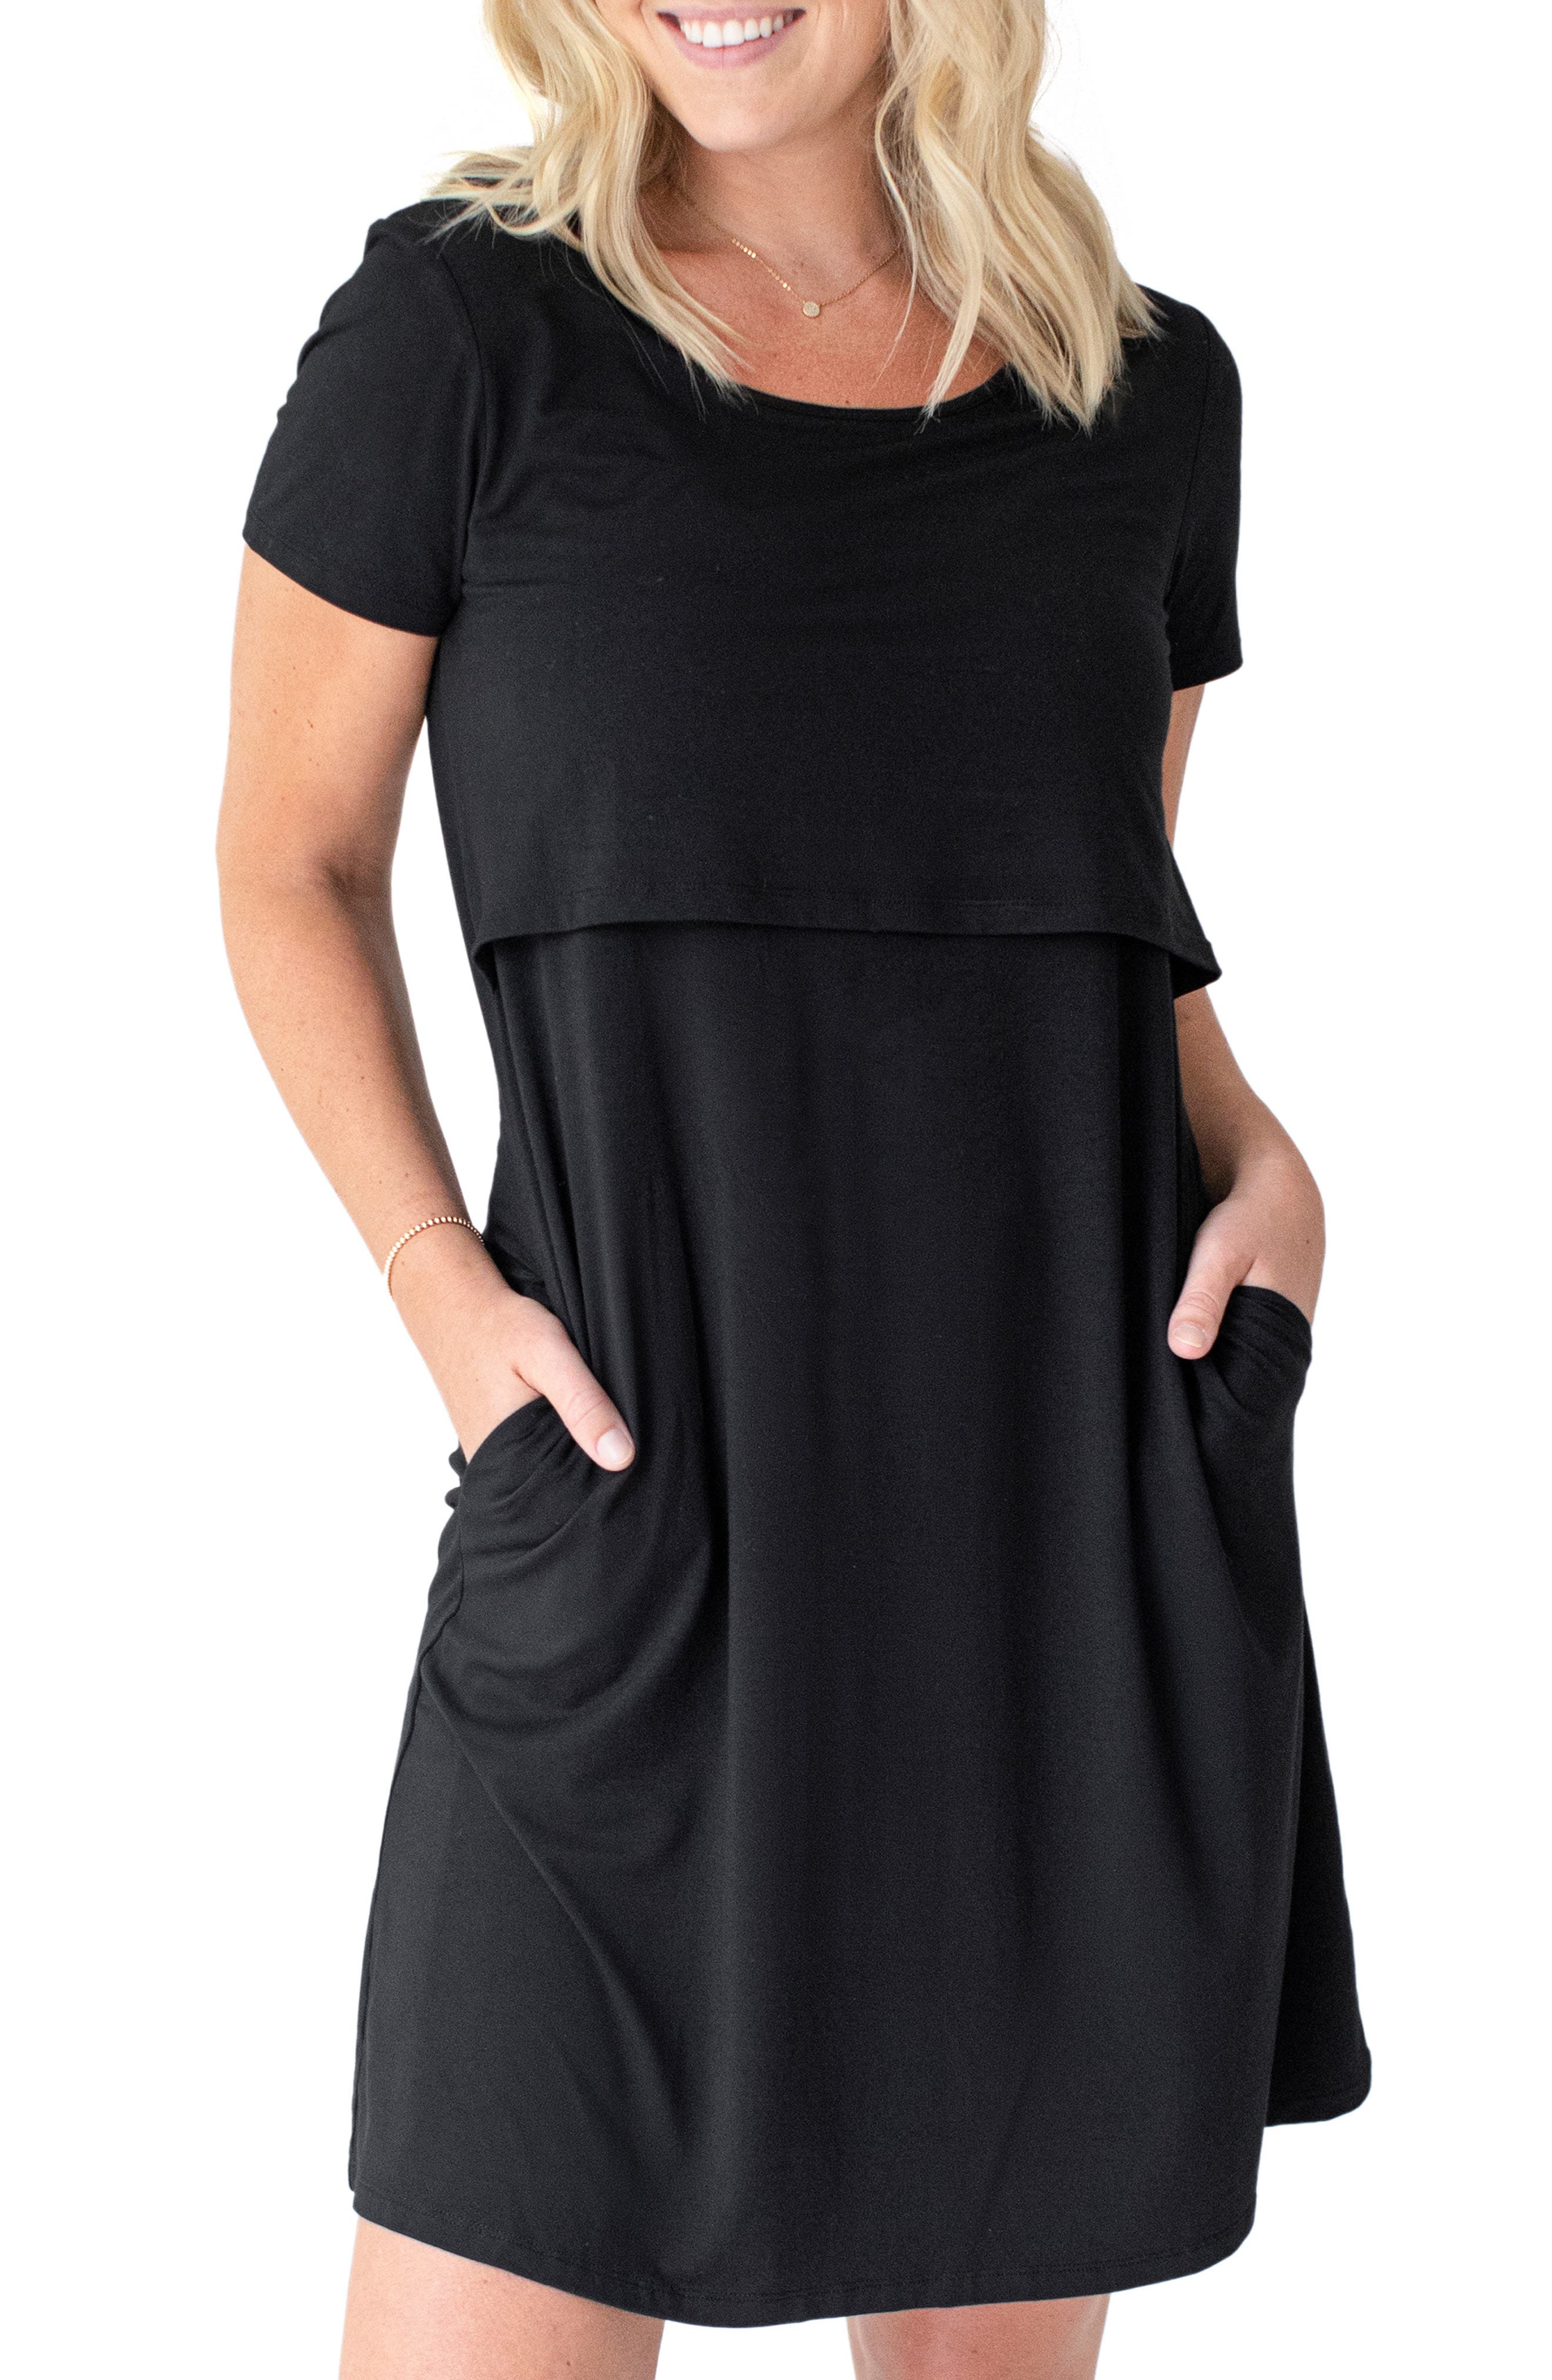 Maternity Maxi Dress Ladies Pregnancy Plus Size Strapless Clothes V-neck Casual